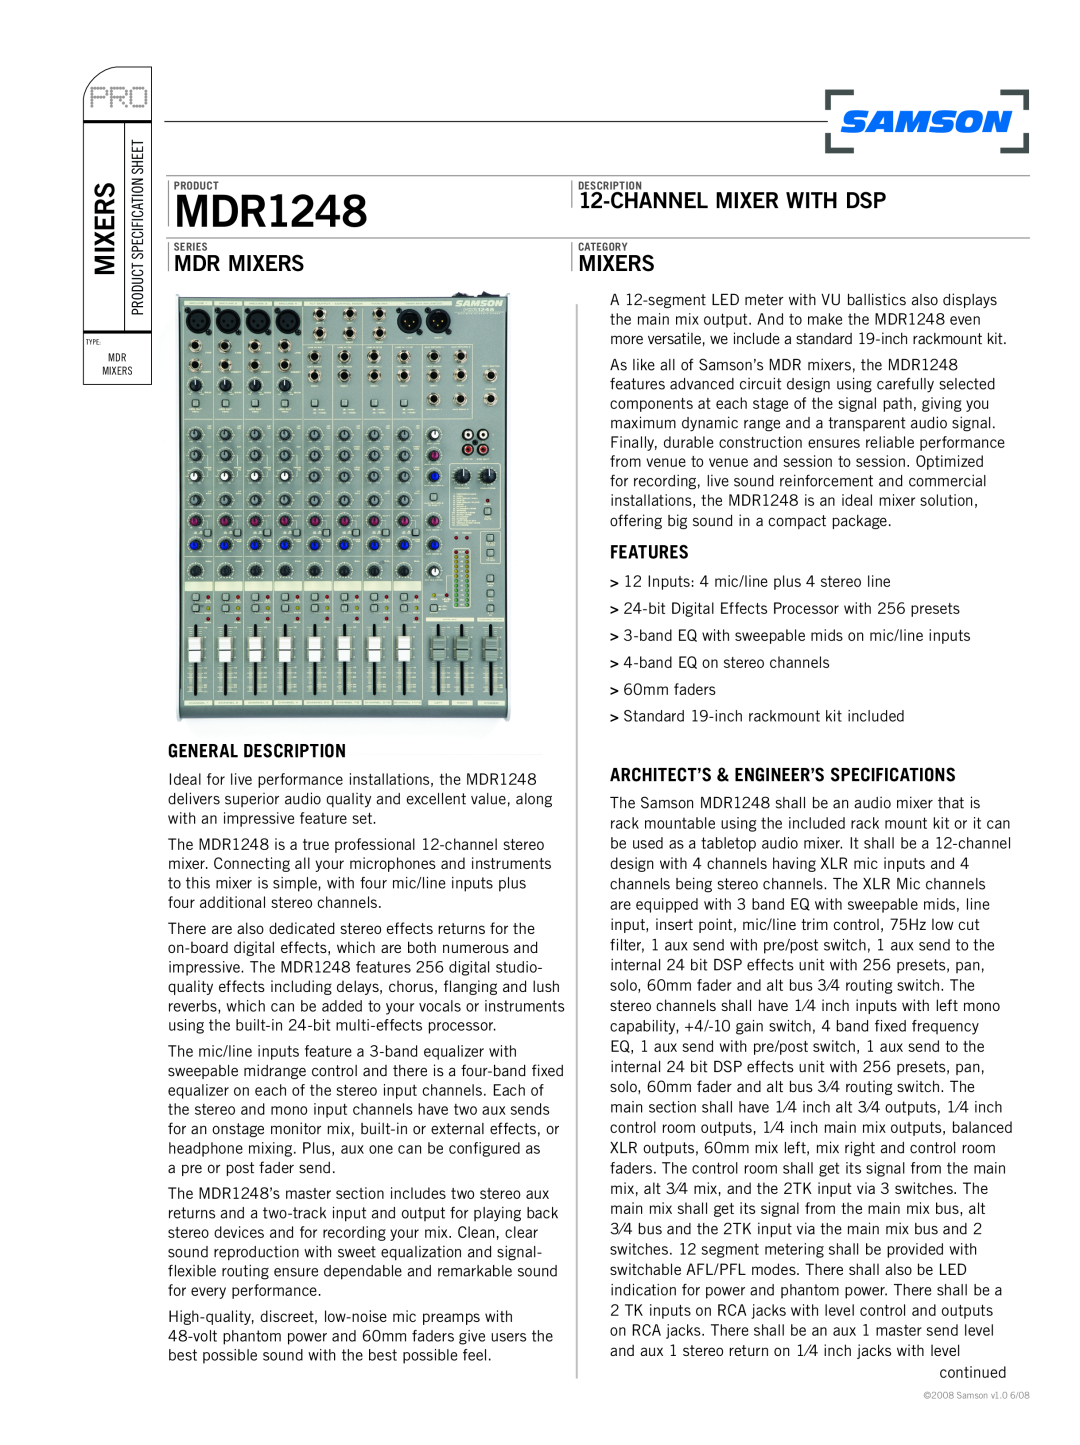 Samson MDR1248 specifications General Description, Features, Architect’S & Engineer’S Specifications, Mdr Mixers 